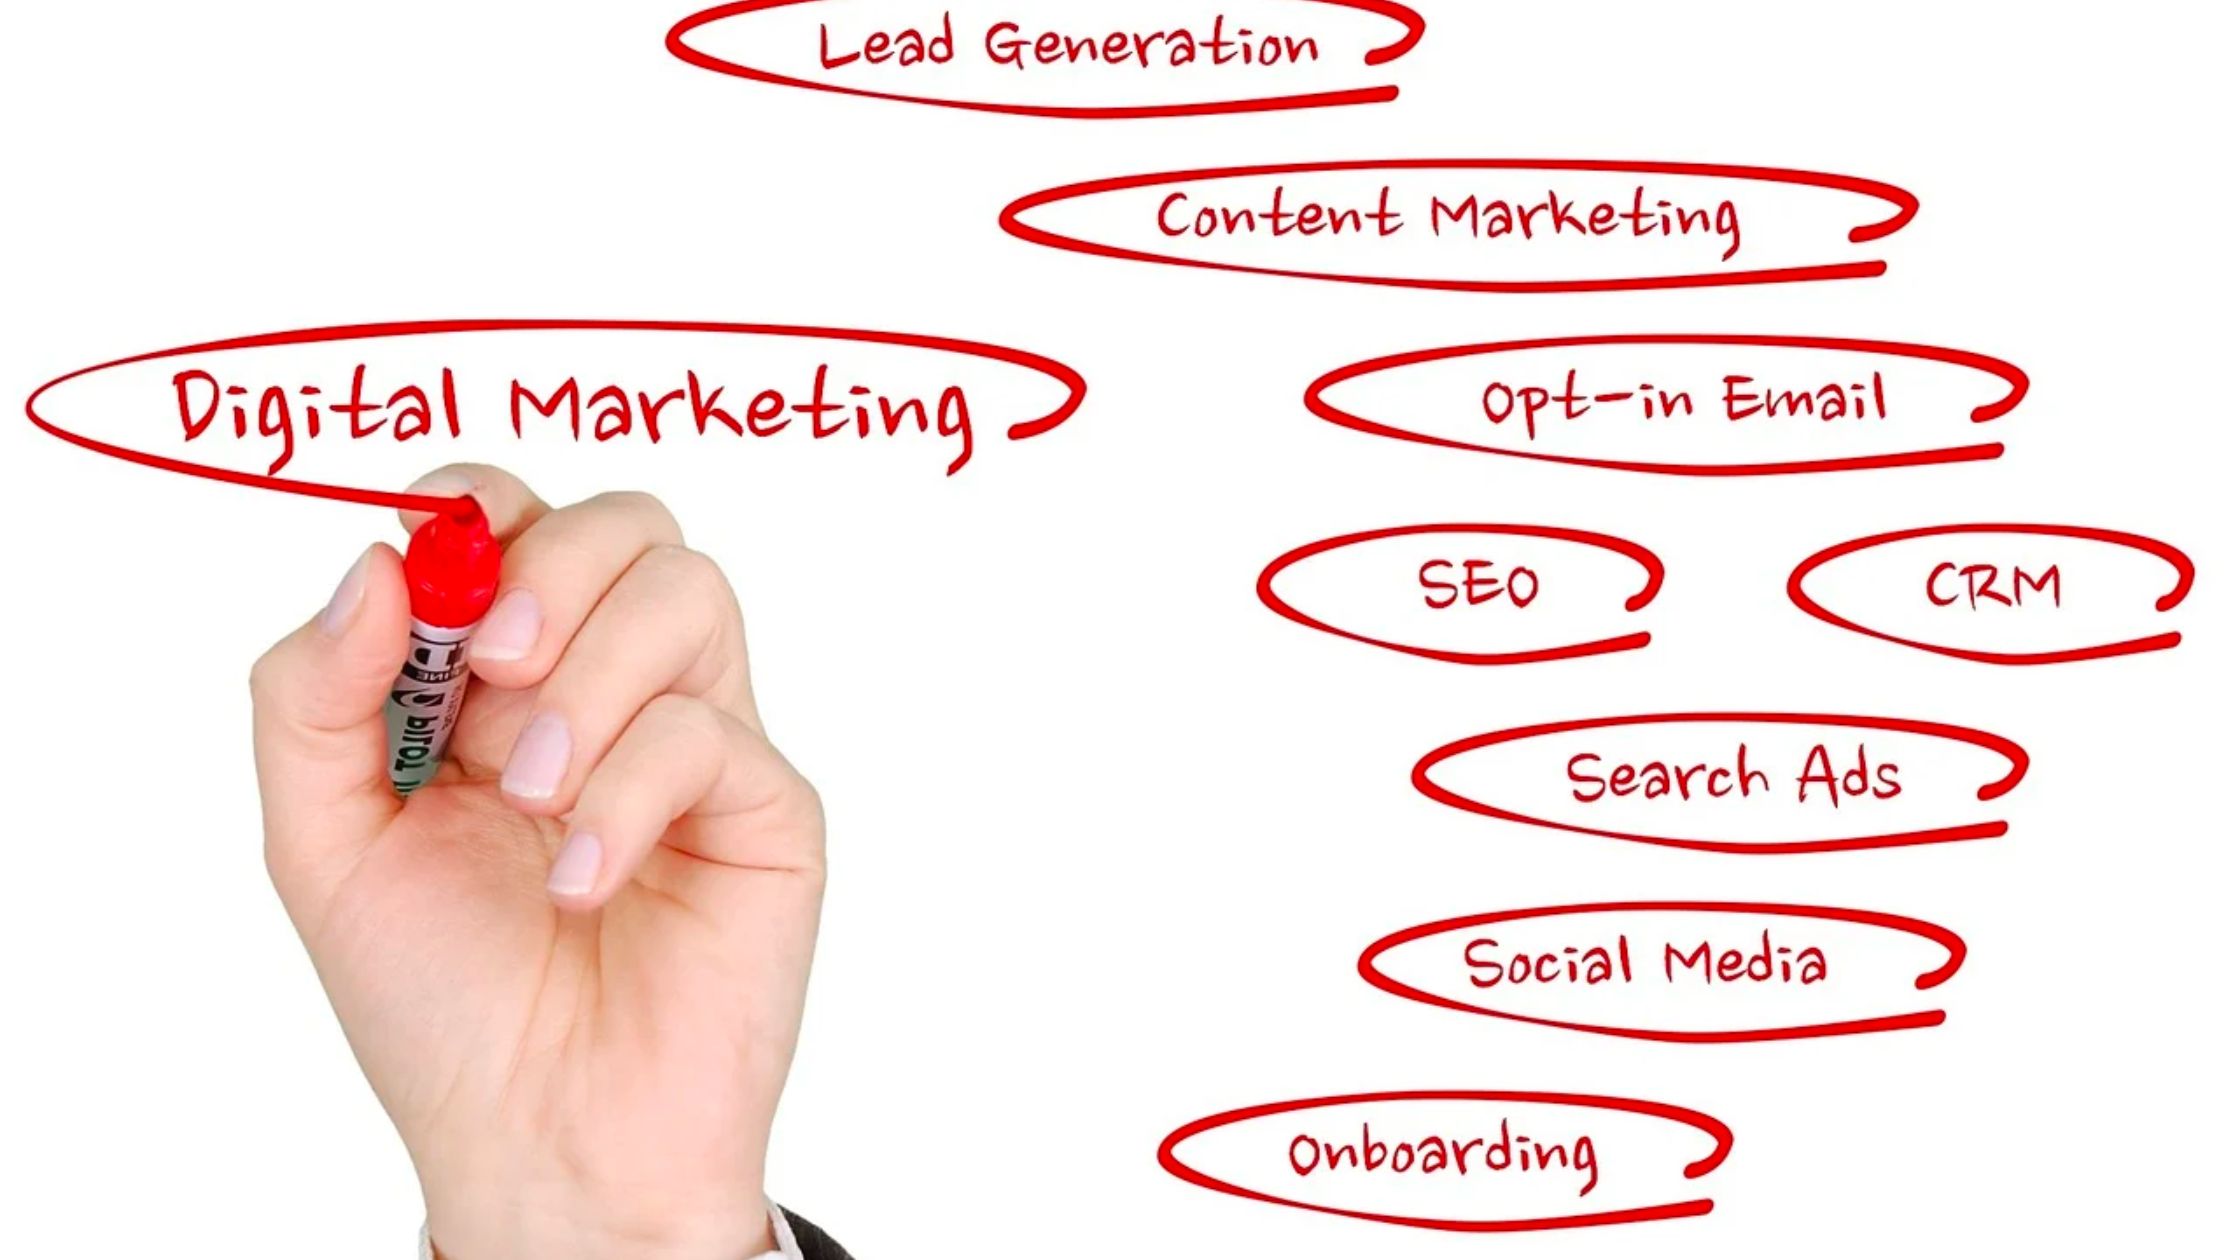 Different Types Of Marketing Strategies